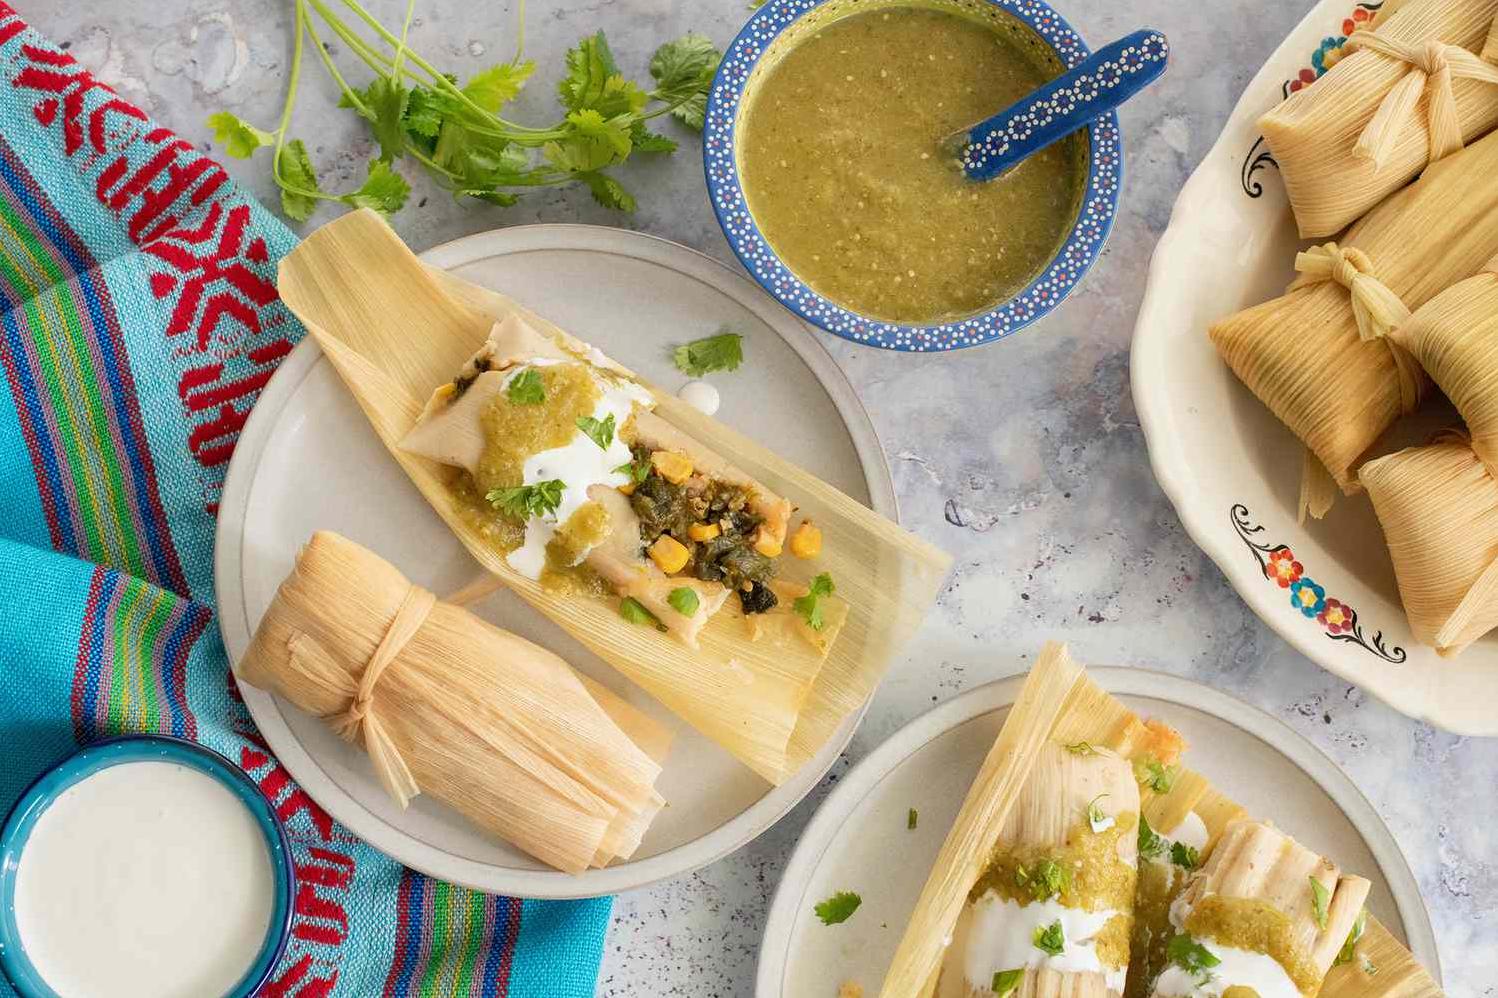  Satisfy your cravings with these flavorful Corn, Cheese and Chili Tamales